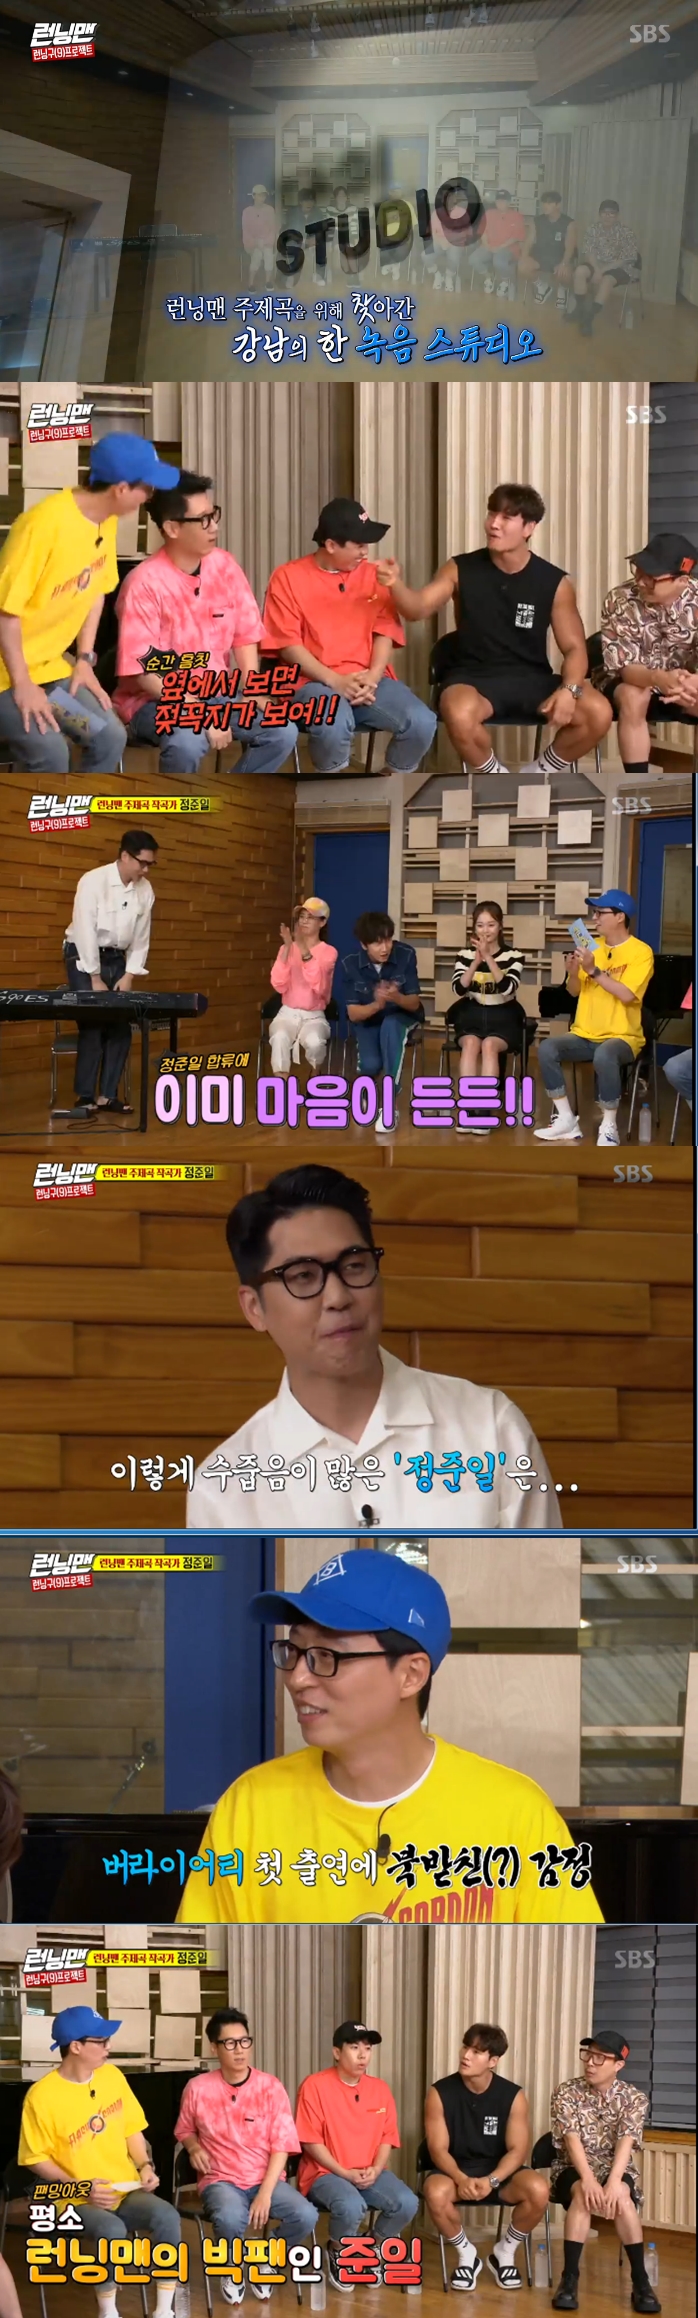 Jeong Joon-Il confesses to being a Running Man fanIn the SBS entertainment program Running Man broadcasted on the afternoon of the 4th, Jeong Joon-Il visited the recording site as a person to make the Running Man theme song for the members.Unlike usual, the members who started opening in the recording room started recording with a cheerful atmosphere, teasing Kim Jong Kook who came out wearing sleeveless.At that time, Jeong Joon-Il entered the recording hall with shame.Yoo Jae-Suk was satisfied with the news that the production team had visited Jeong Joon-Il to make the theme song and said, I feel good once.However, the introverted Jeong Joon-Il was ashamed while greeting, and Yoo Jae-Suk asked, Is it usually this shay?When Jeong Joon-Il was awkward among the members, Yoo Jae-Suk asked, How did you get to meet the crew?In response, Jin Joon-Il replied, I am usually a running man fan.The members tried to make Jeong Joon-Il comfortable, and Jeong Joon-Il also showed members adjusting to the atmosphere by testing each member.